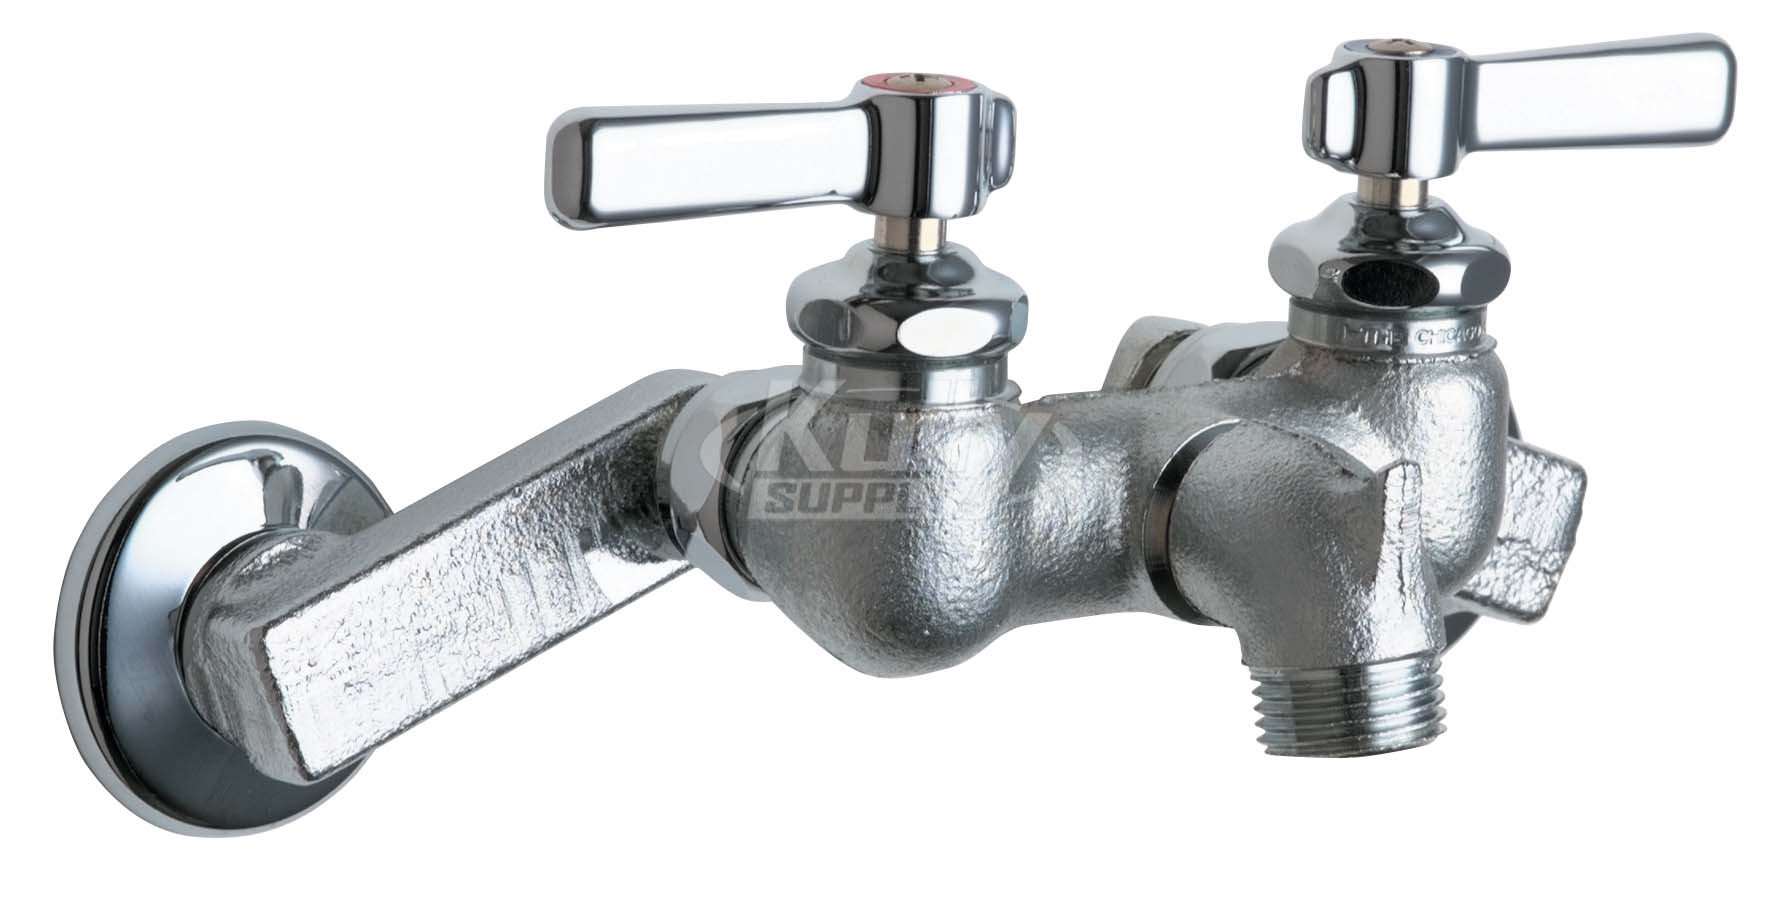 Chicago 305-XKRCF Service Sink Faucet